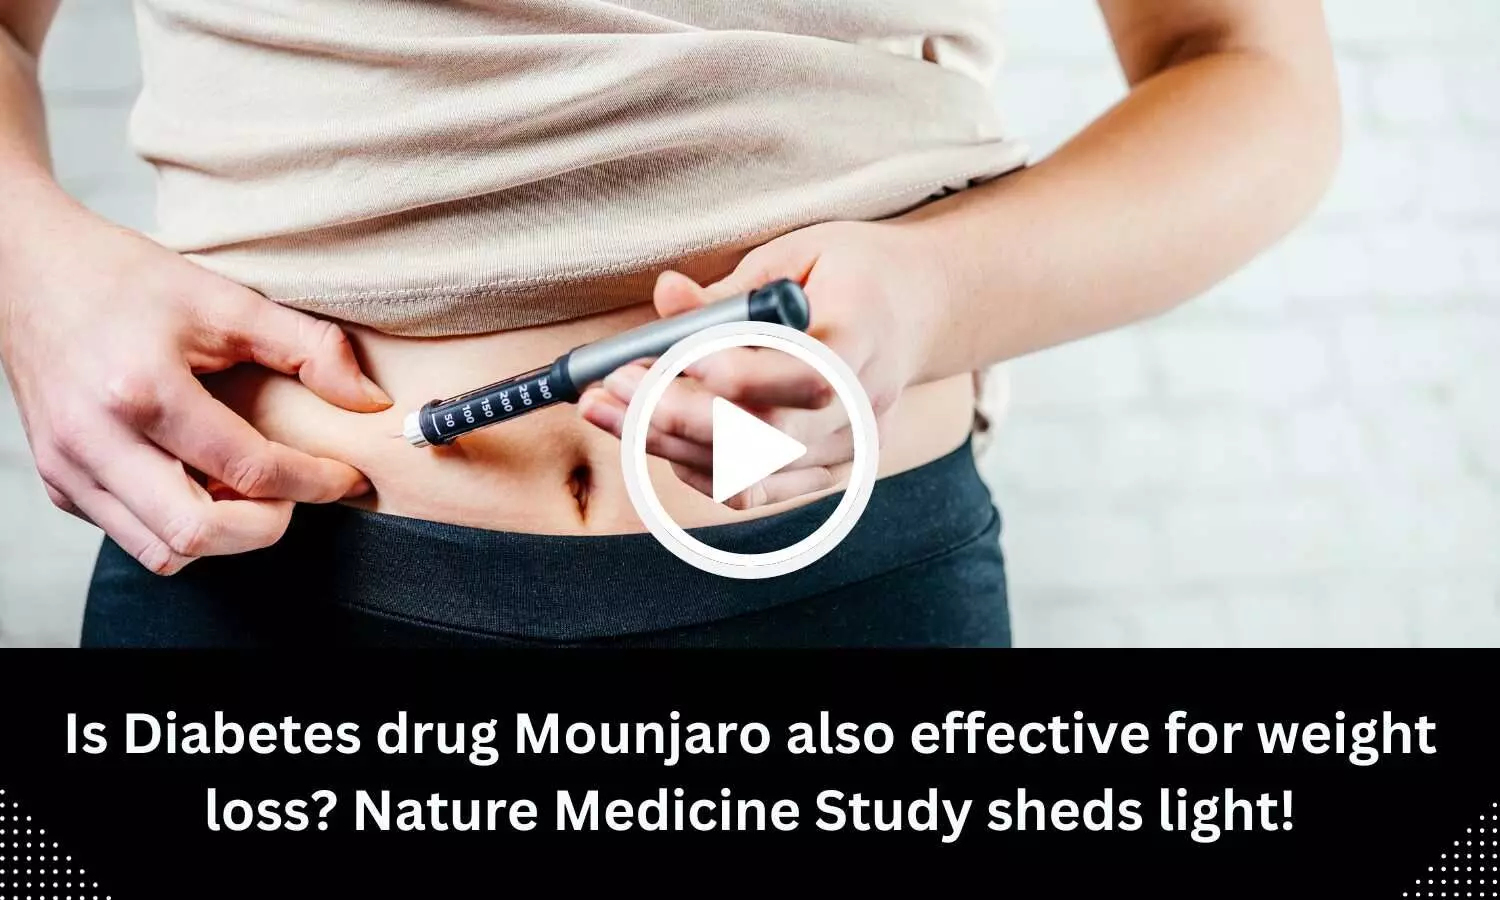 Is Diabetes drug Mounjaro also effective for weight loss? Nature Medicine Study sheds light!